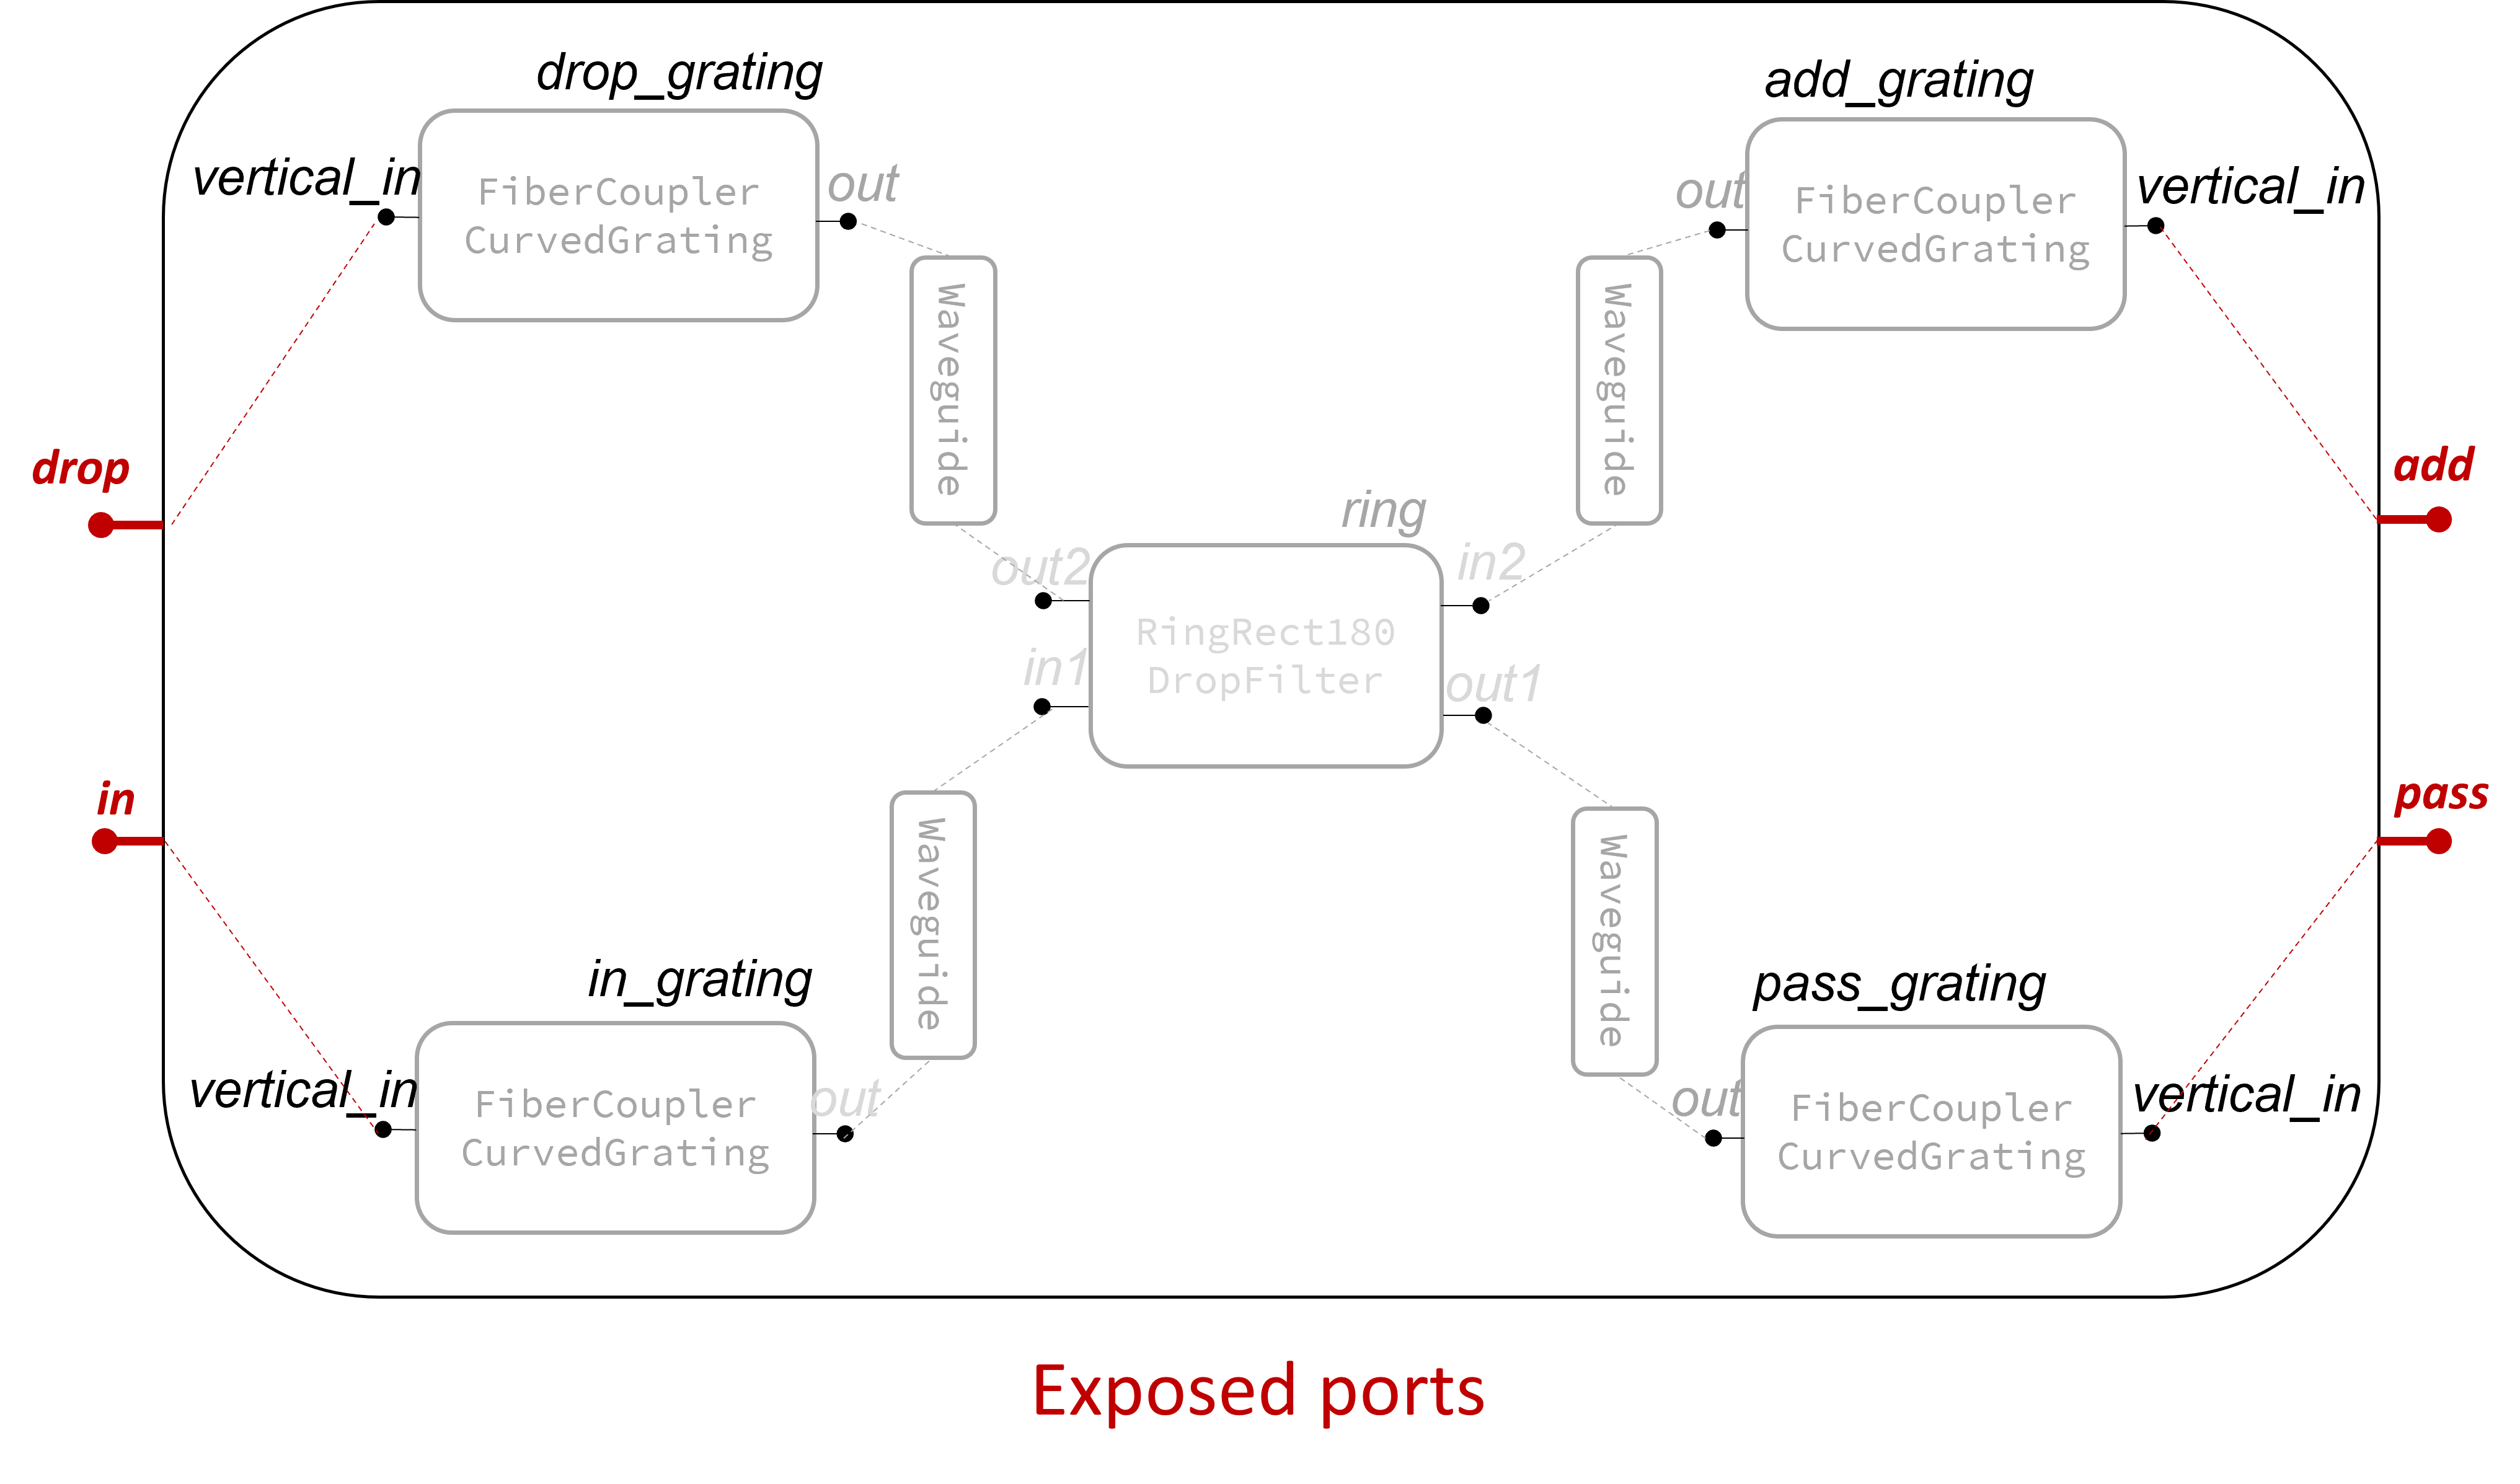 Circuit with 4 exposed ports